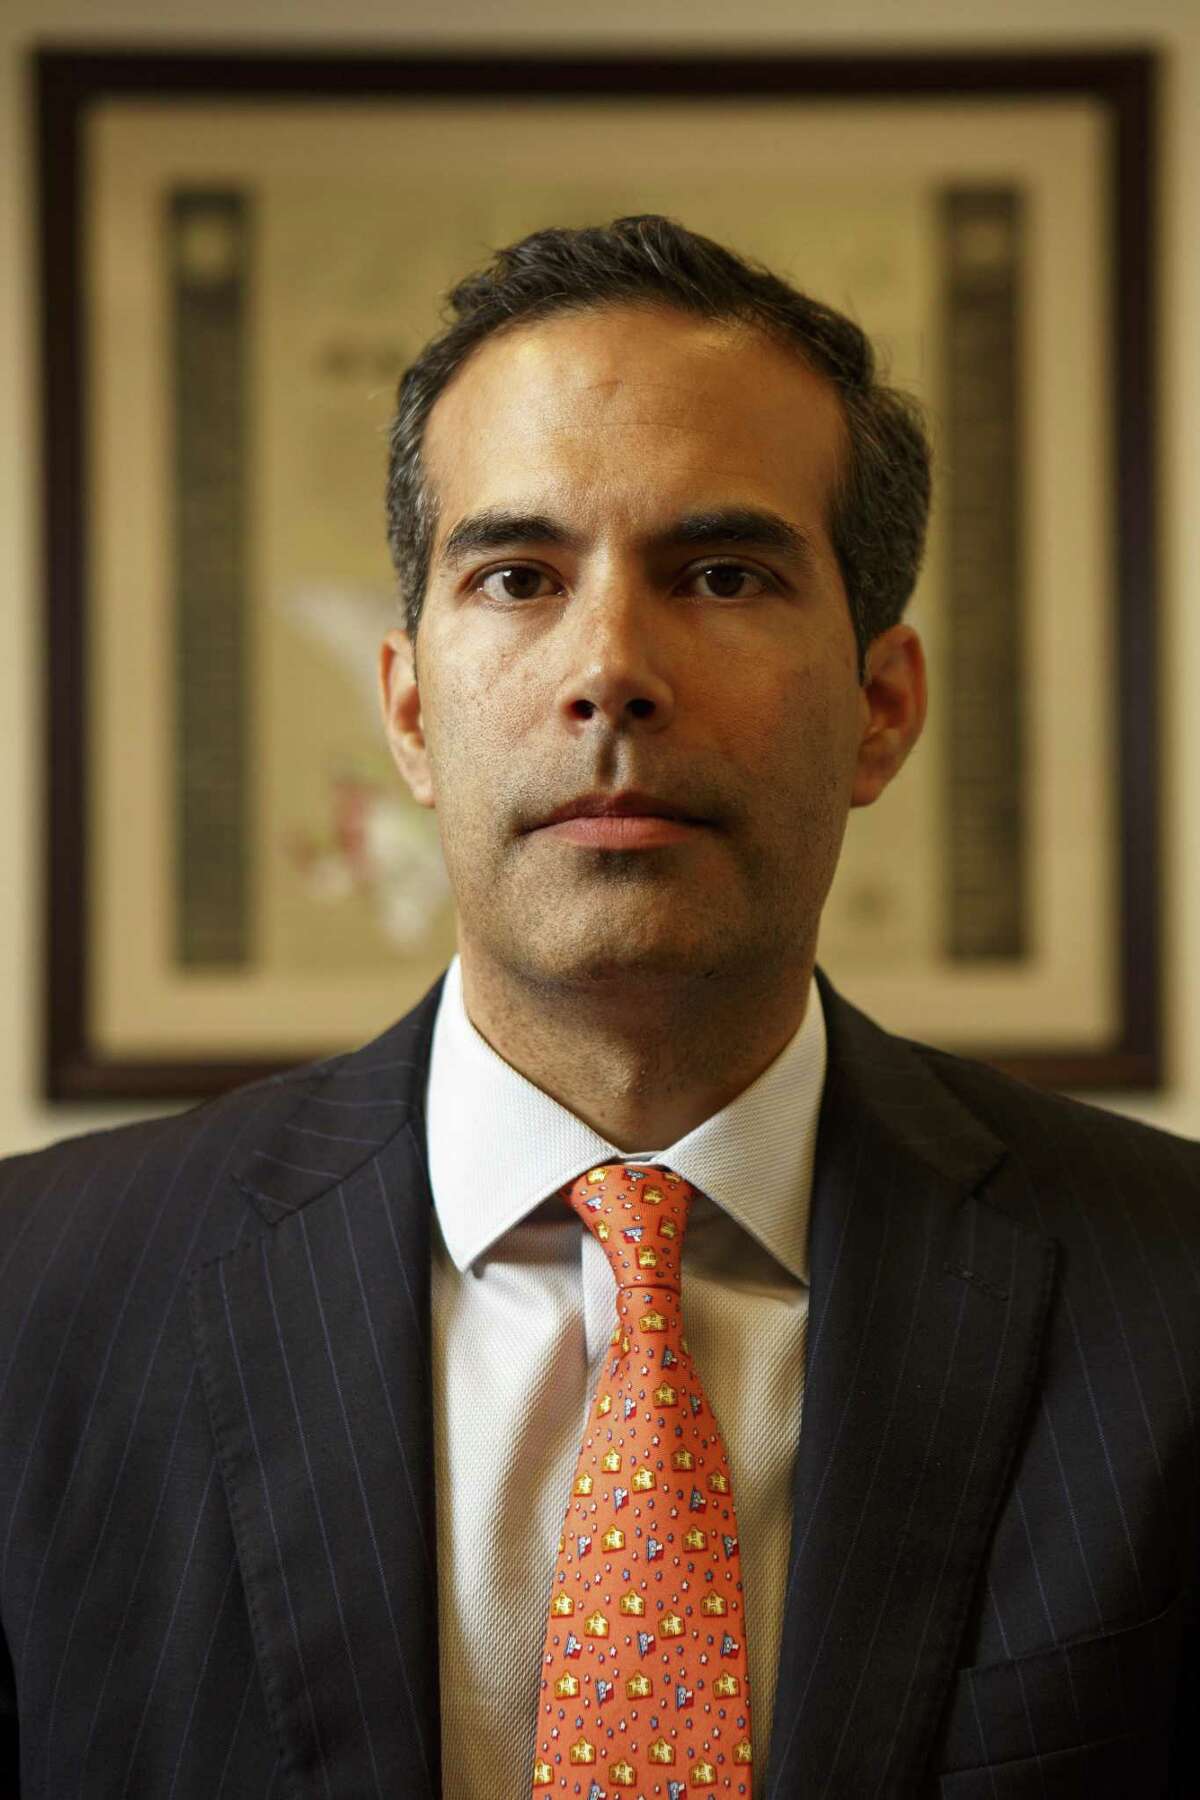 Texas Land Commisioner, George P. Bush’s office leases land to generate money for the school fund.